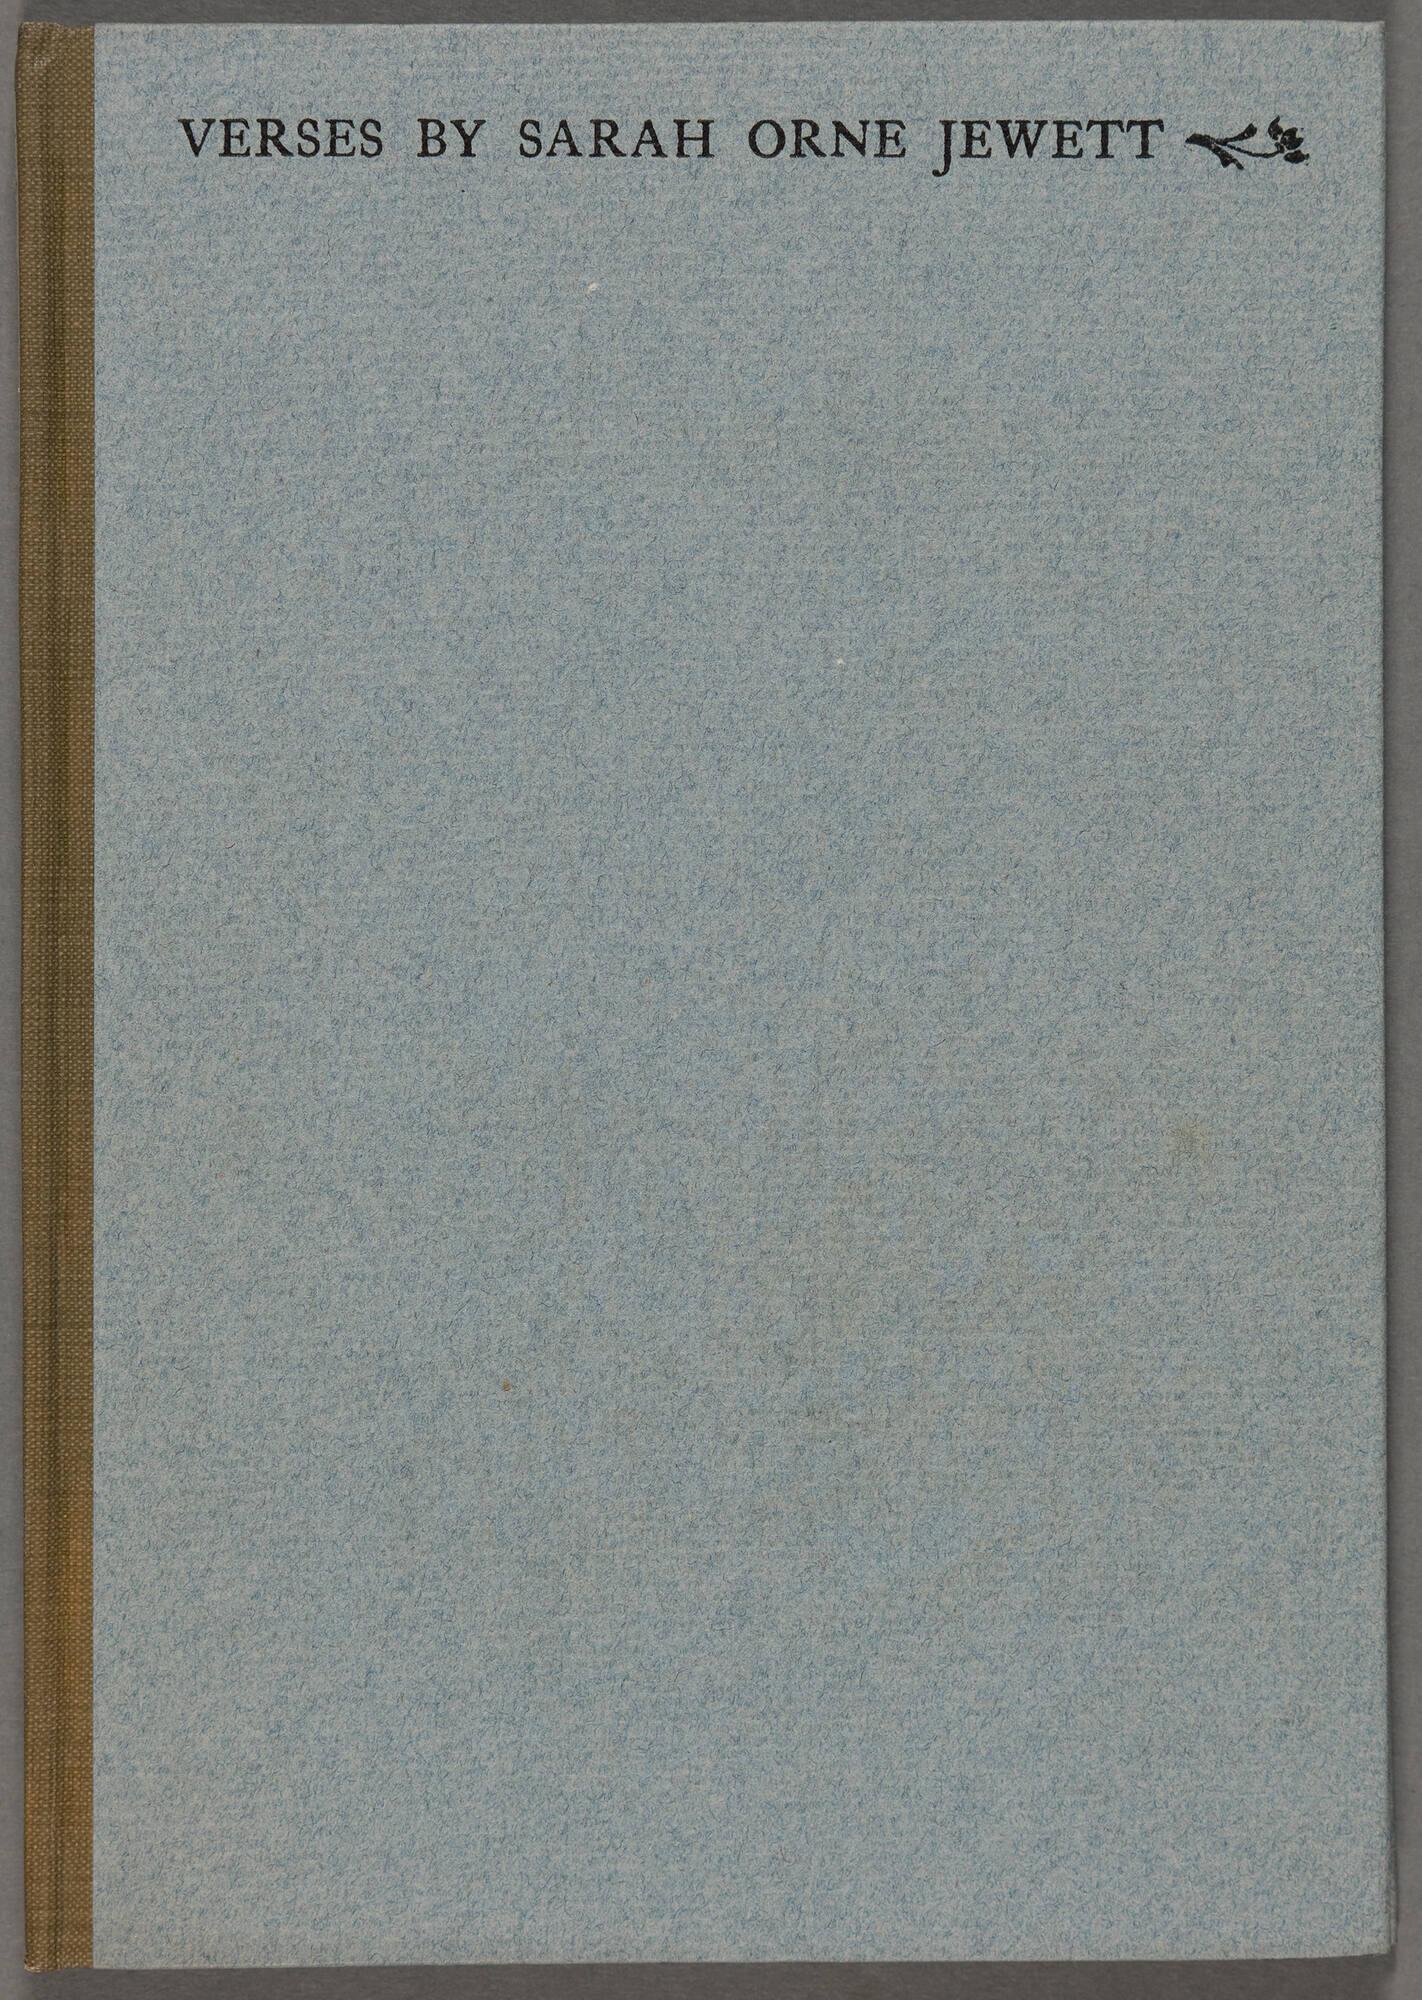 A cover of a text titled Verses by Sarah Orne Jewett.